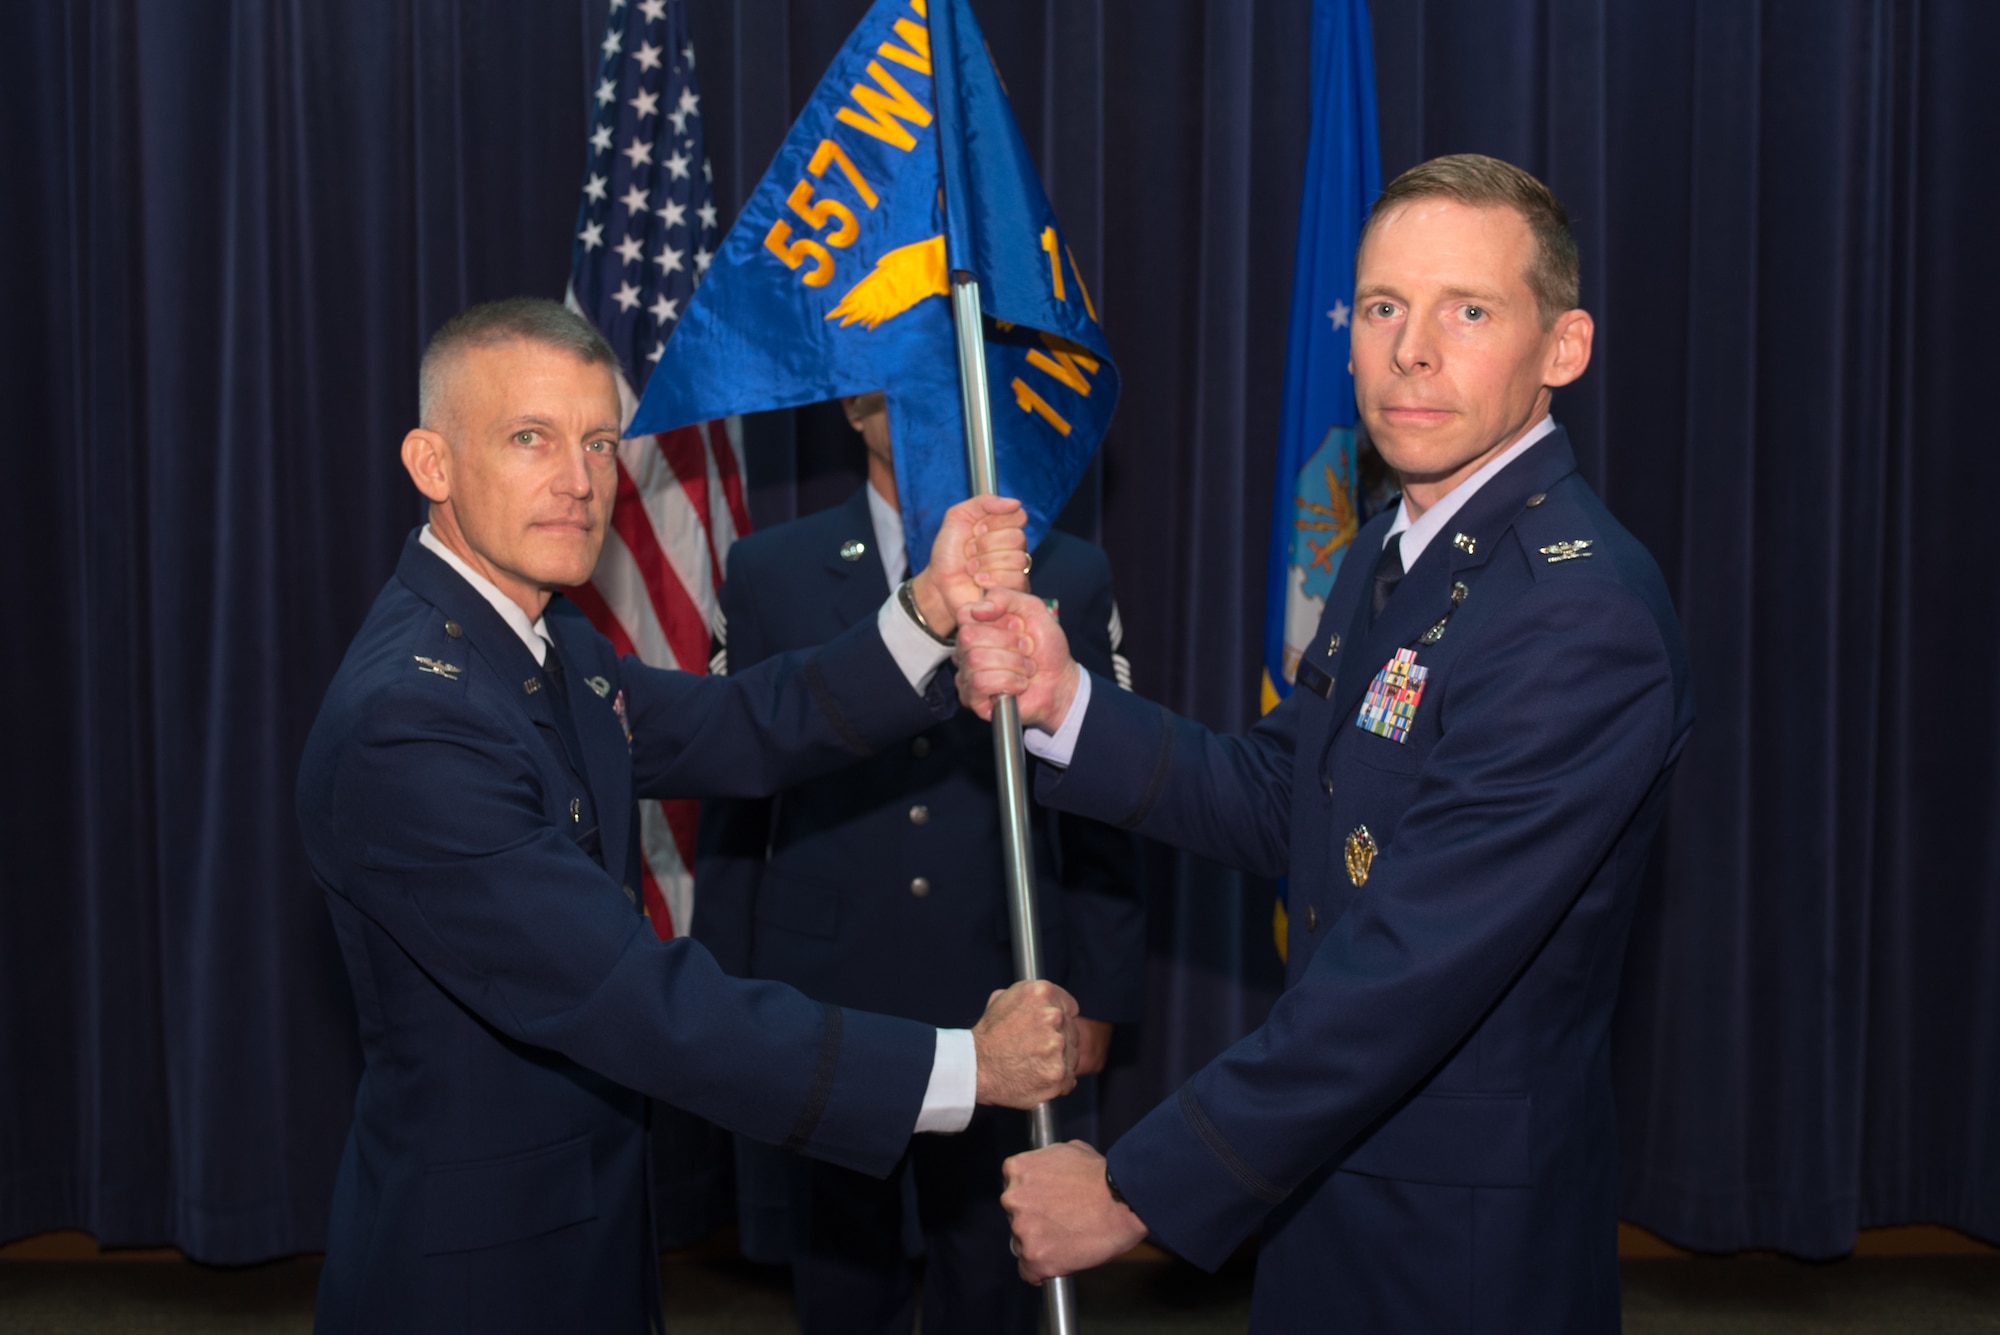 U.S. Air Force Col. Travis Steen, 1st Weather Group (WXG) commander, assumes command of the 1st WXG from U.S. Air Force Col. Brian Pukall, 557th Weather Wing commander, July 24, 2018, at Offutt Air Force Base, Nebraska. Steen was previously assigned to Offutt AFB from 1999-2002 and was the officer in charge of radar meteorology applications when the 557th WW was still the Air Force Weather Agency. (U.S. Air Force photo by Paul Shirk)